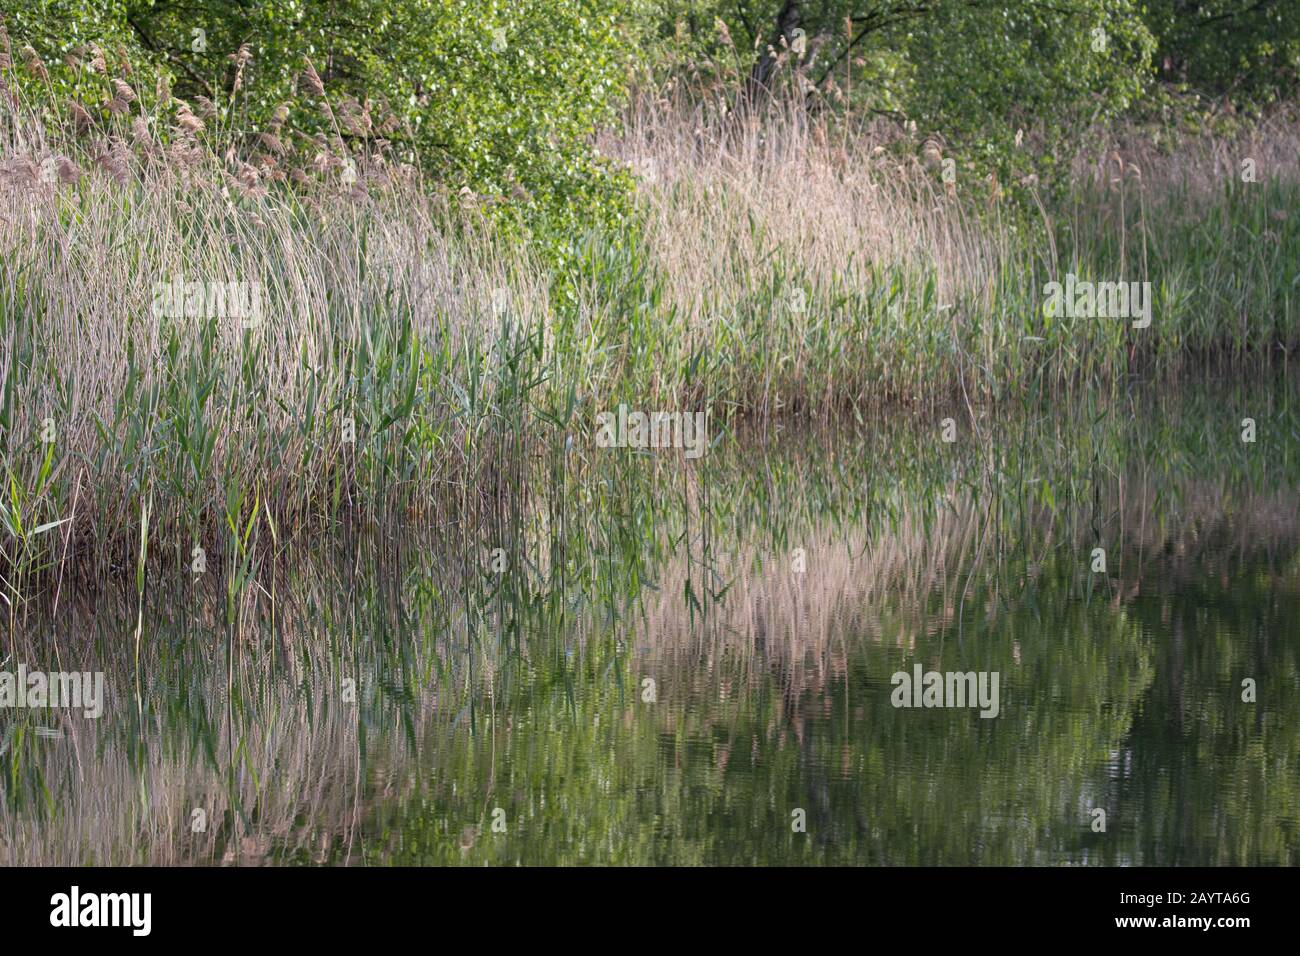 A reed bed reflected in a mirror smooth lake Stock Photo